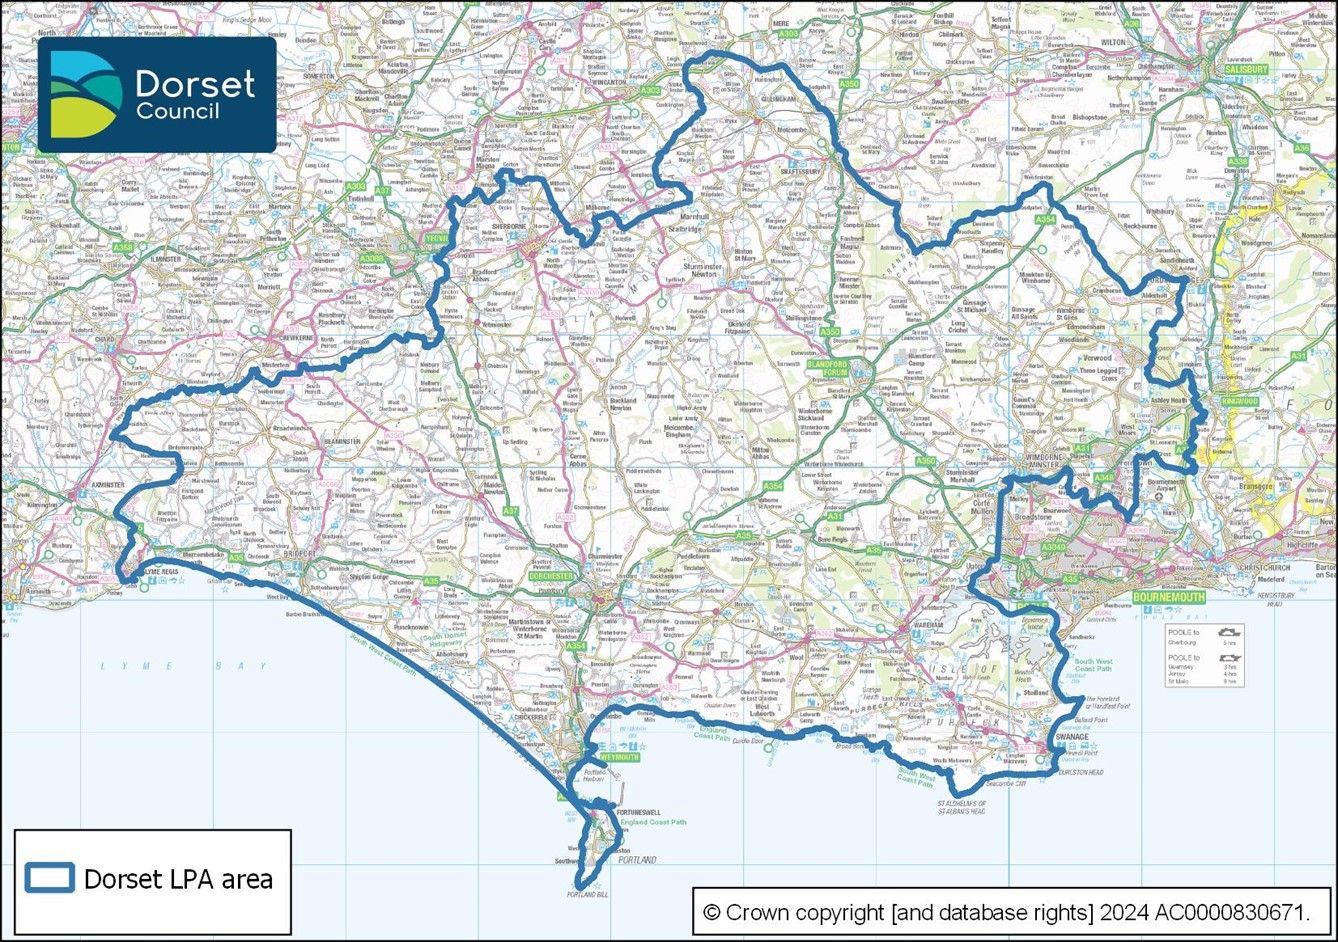 A map outlining the Dorset Council area